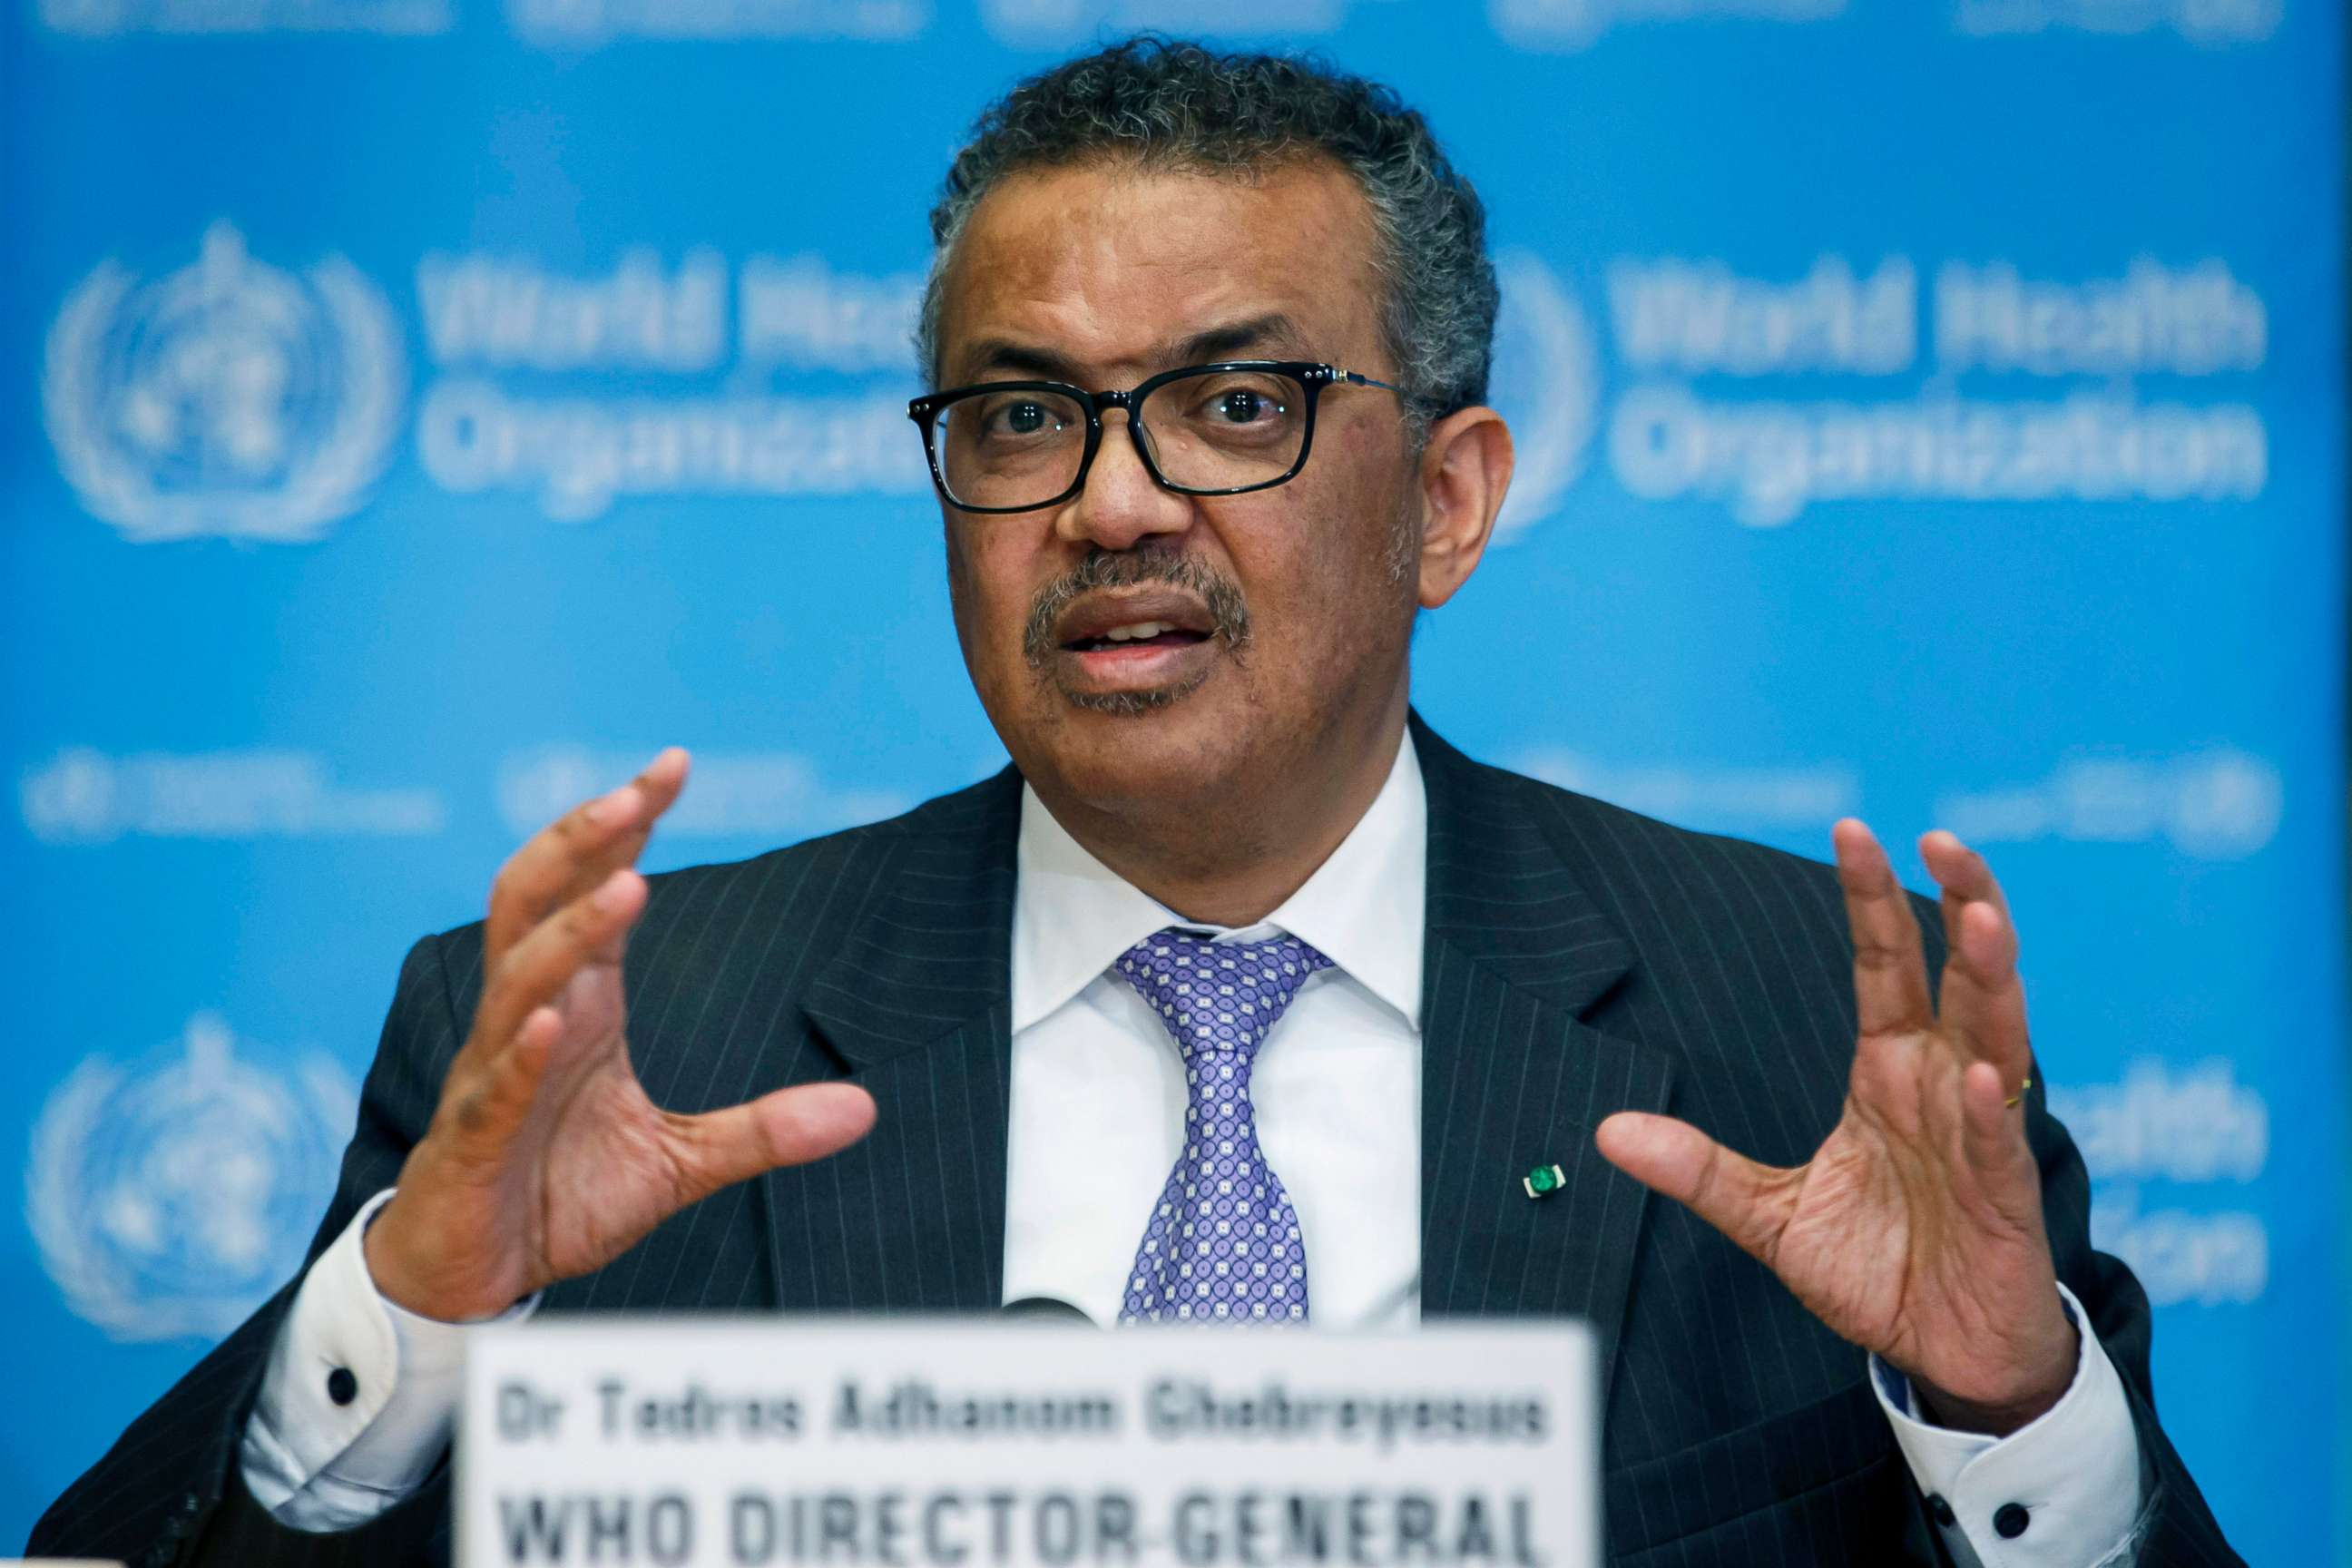 PHOTO: In this March 9, 2020, file photo, Tedros Adhanom Ghebreyesus, director-general of the World Health Organization, speaks during a news conference in Geneva.